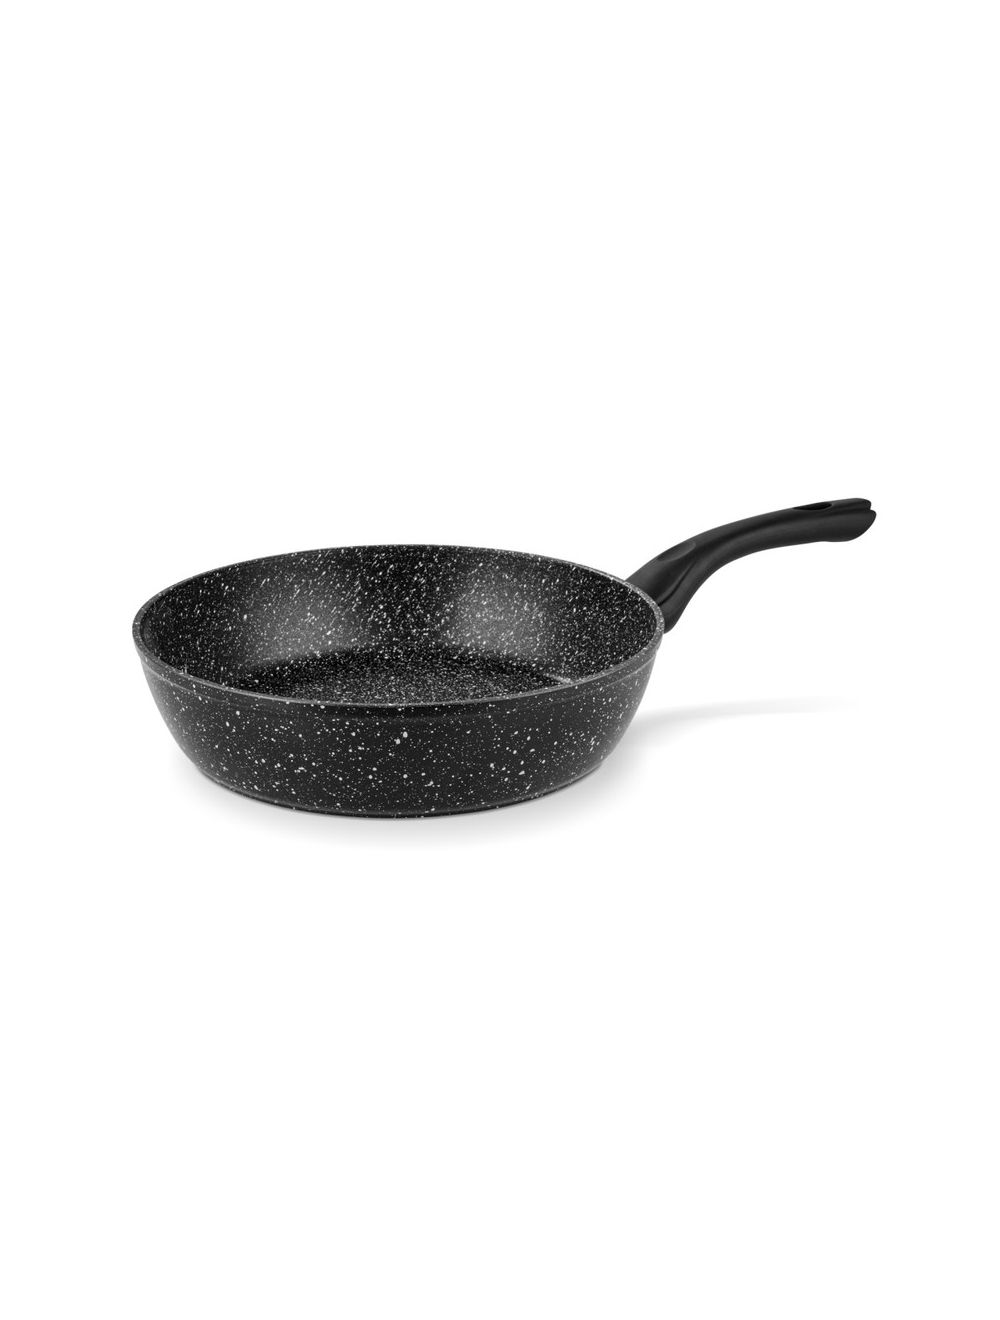 Fissman Deep Frying Pan Fiore Series with Aluminum And Non Stick Coating Black 26x6.5cm